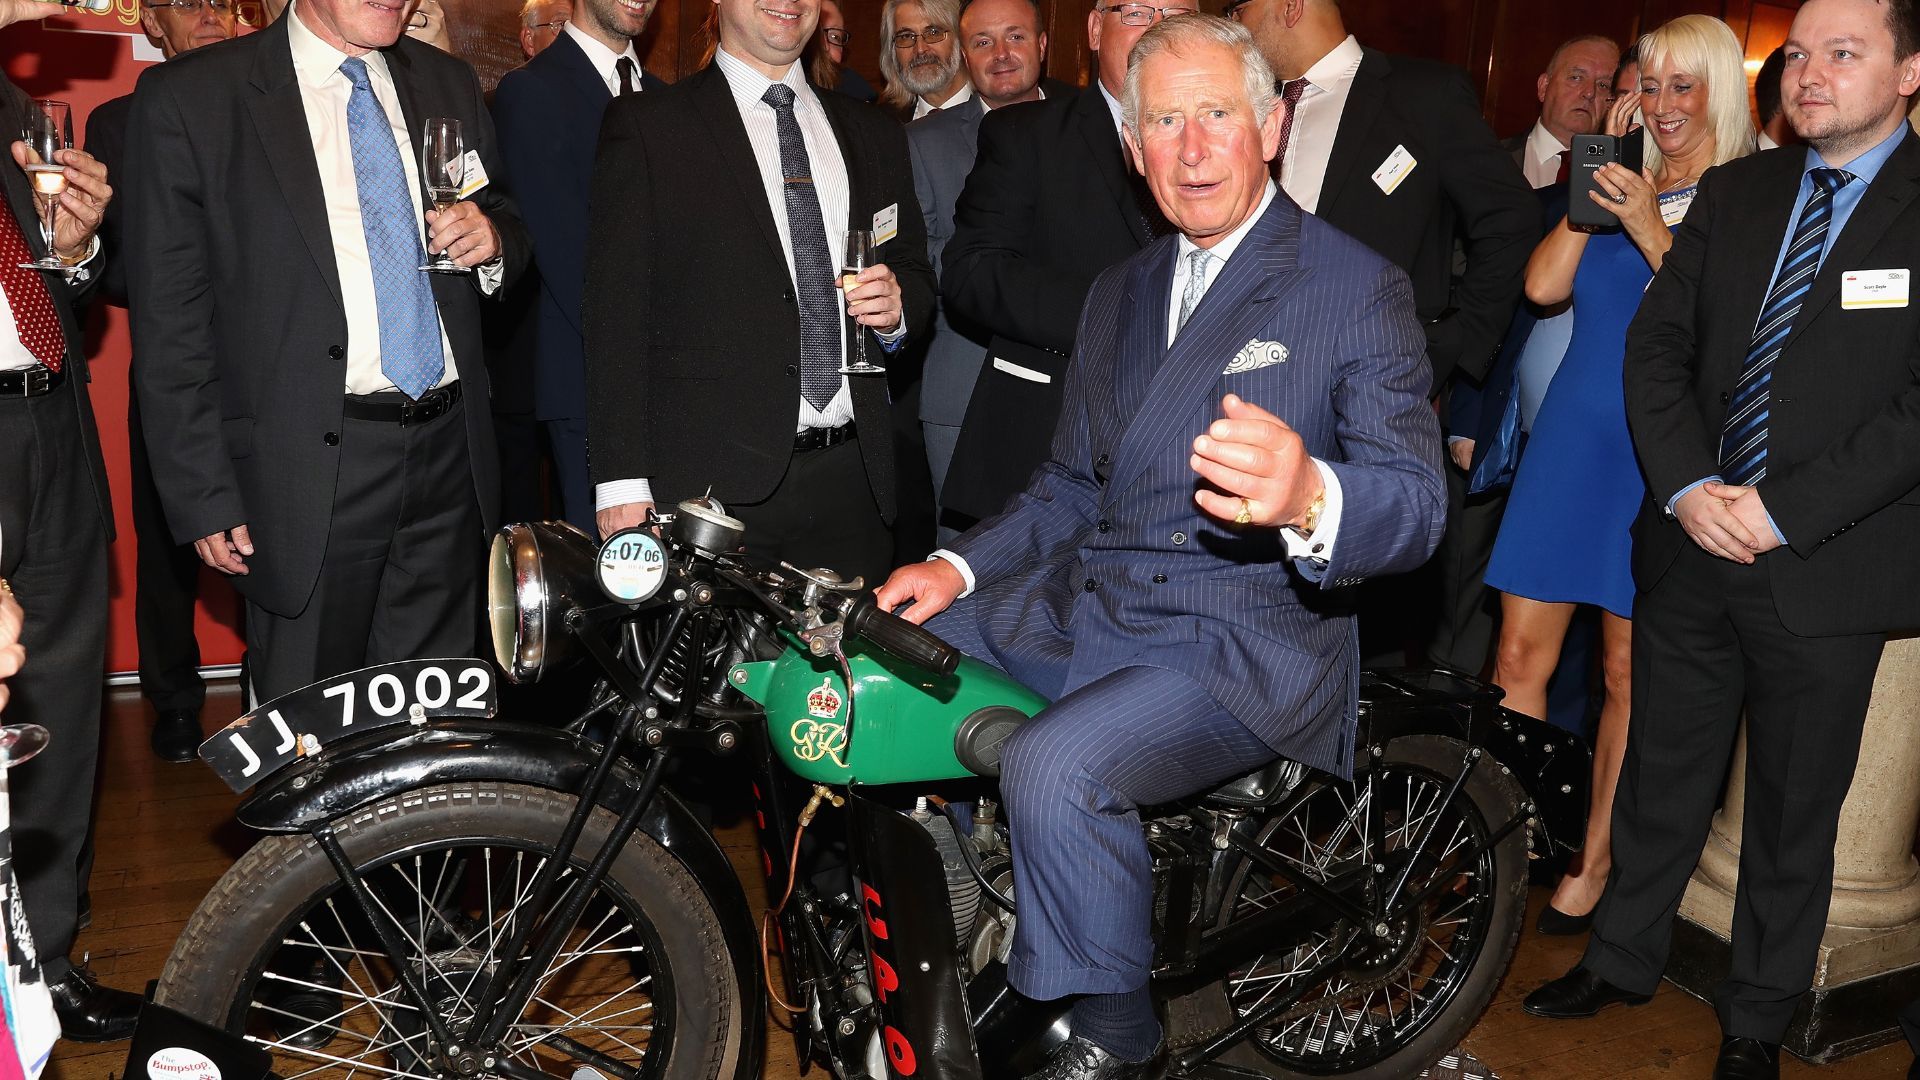 <p>                     For the 500th anniversary of the Royal Mail service, the then-Prince Charles was more than happy to sit on an old-fashioned motorbike that had been used to deliver telegraph messages. Surrounded by an adoring crowd, it looked as though the Prince was quite enjoying himself on the vintage vehicle.                   </p>